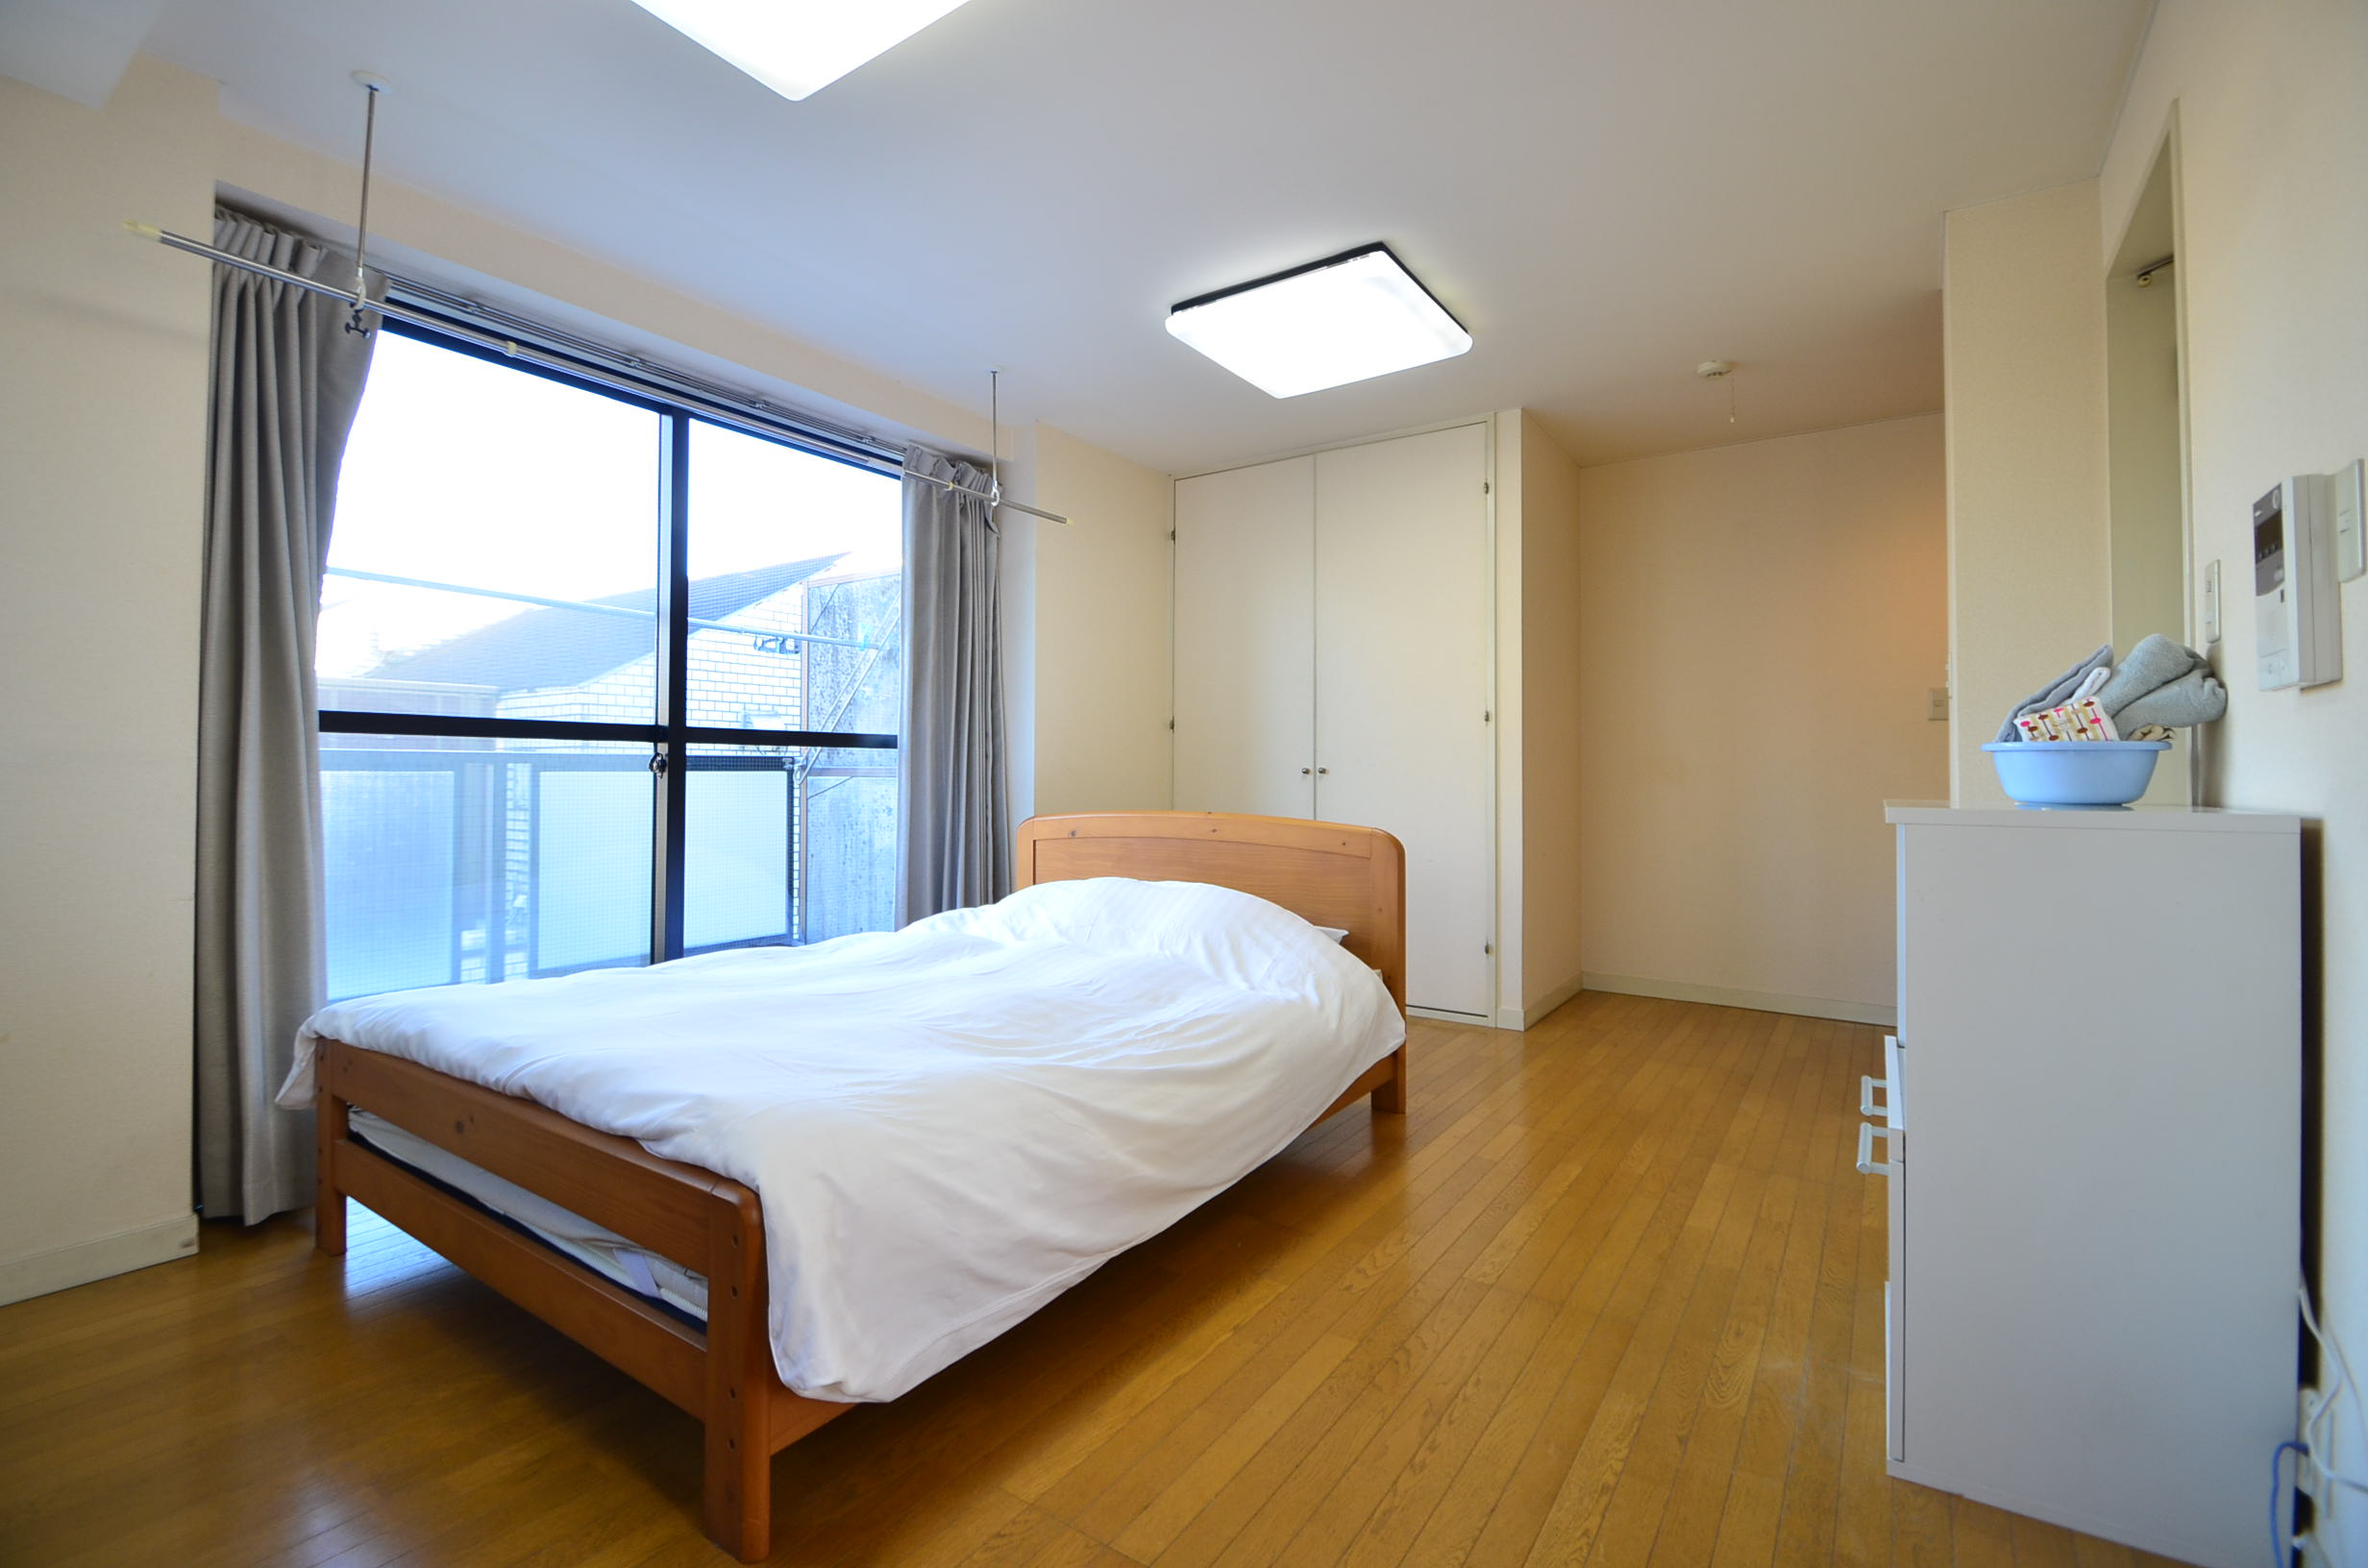 6486Tohto Monthly Welt Meguro Nishi 【Free WiFi, Bathroom/Toilet Separate】 Easy to apply with your smartphone with Tohto!